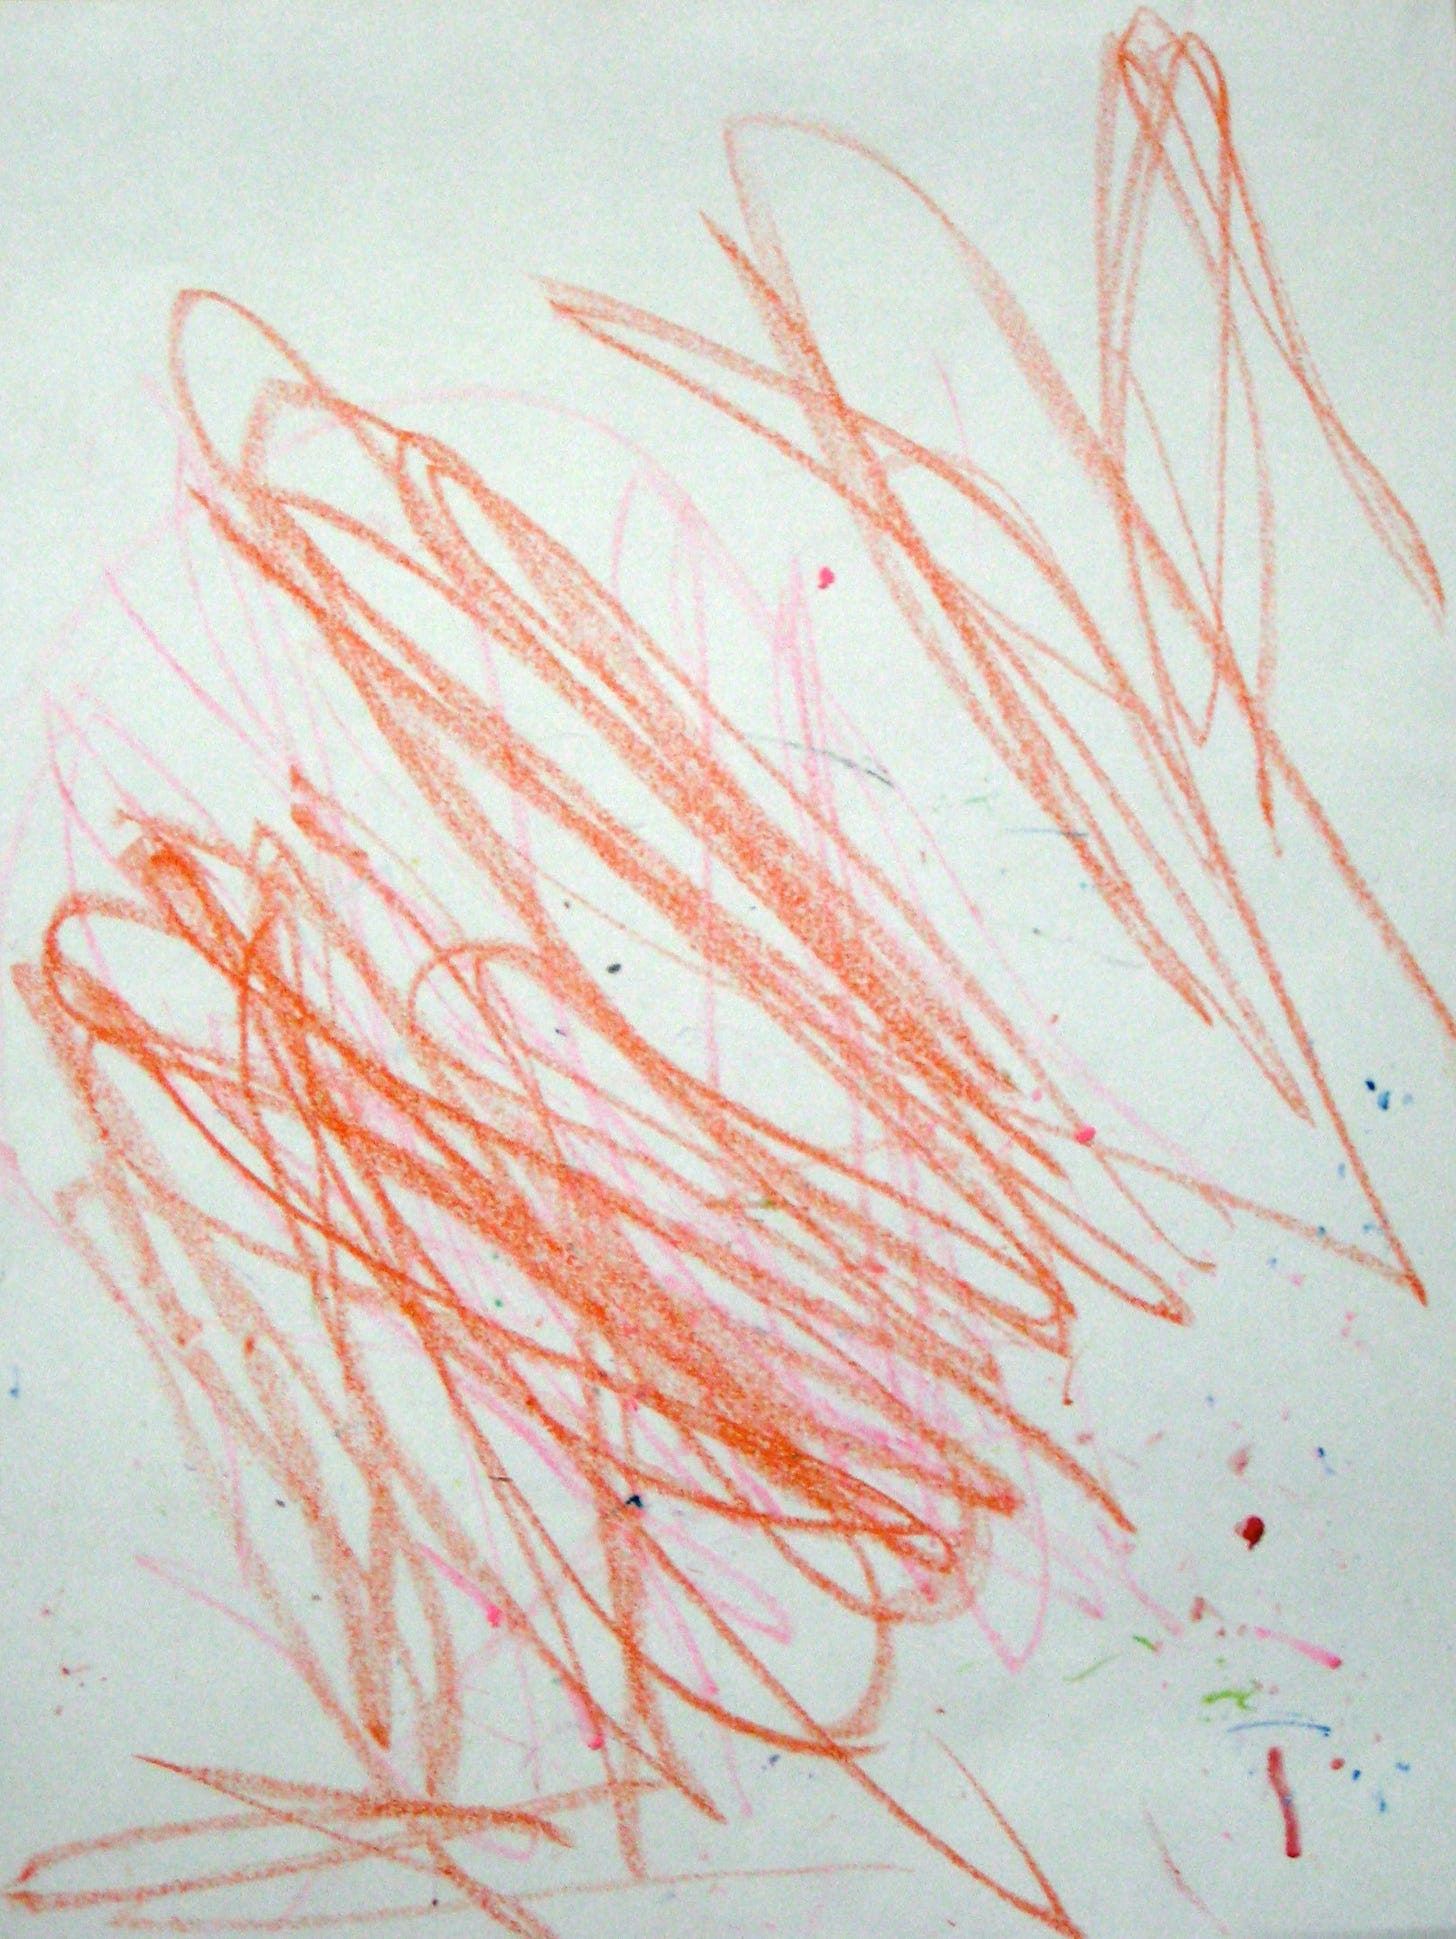 a crayon drawing with bold pink and orange scribbles and a sprinkling of dots in many colors